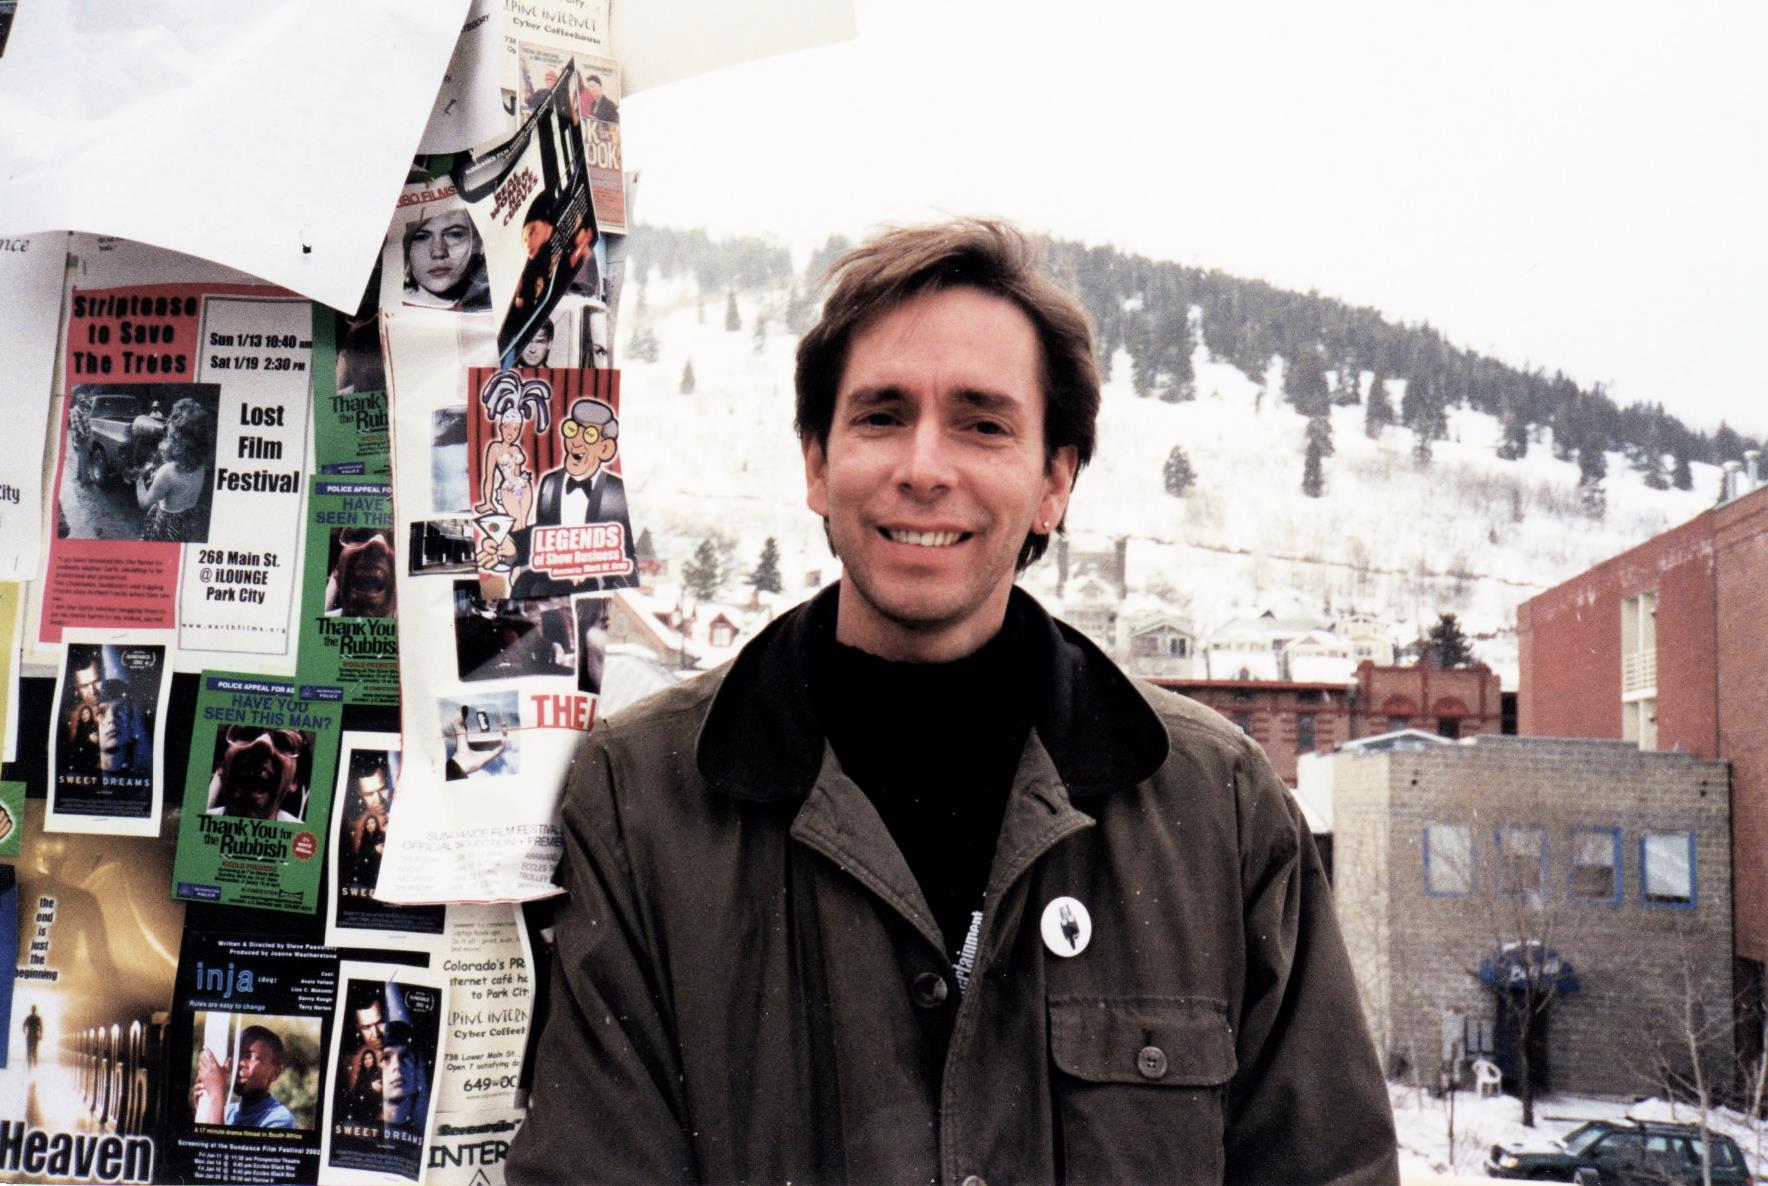 Kristian Berg at 2002 Sundance Film Festival as fellow with the PBS/CPB Producers Academy.